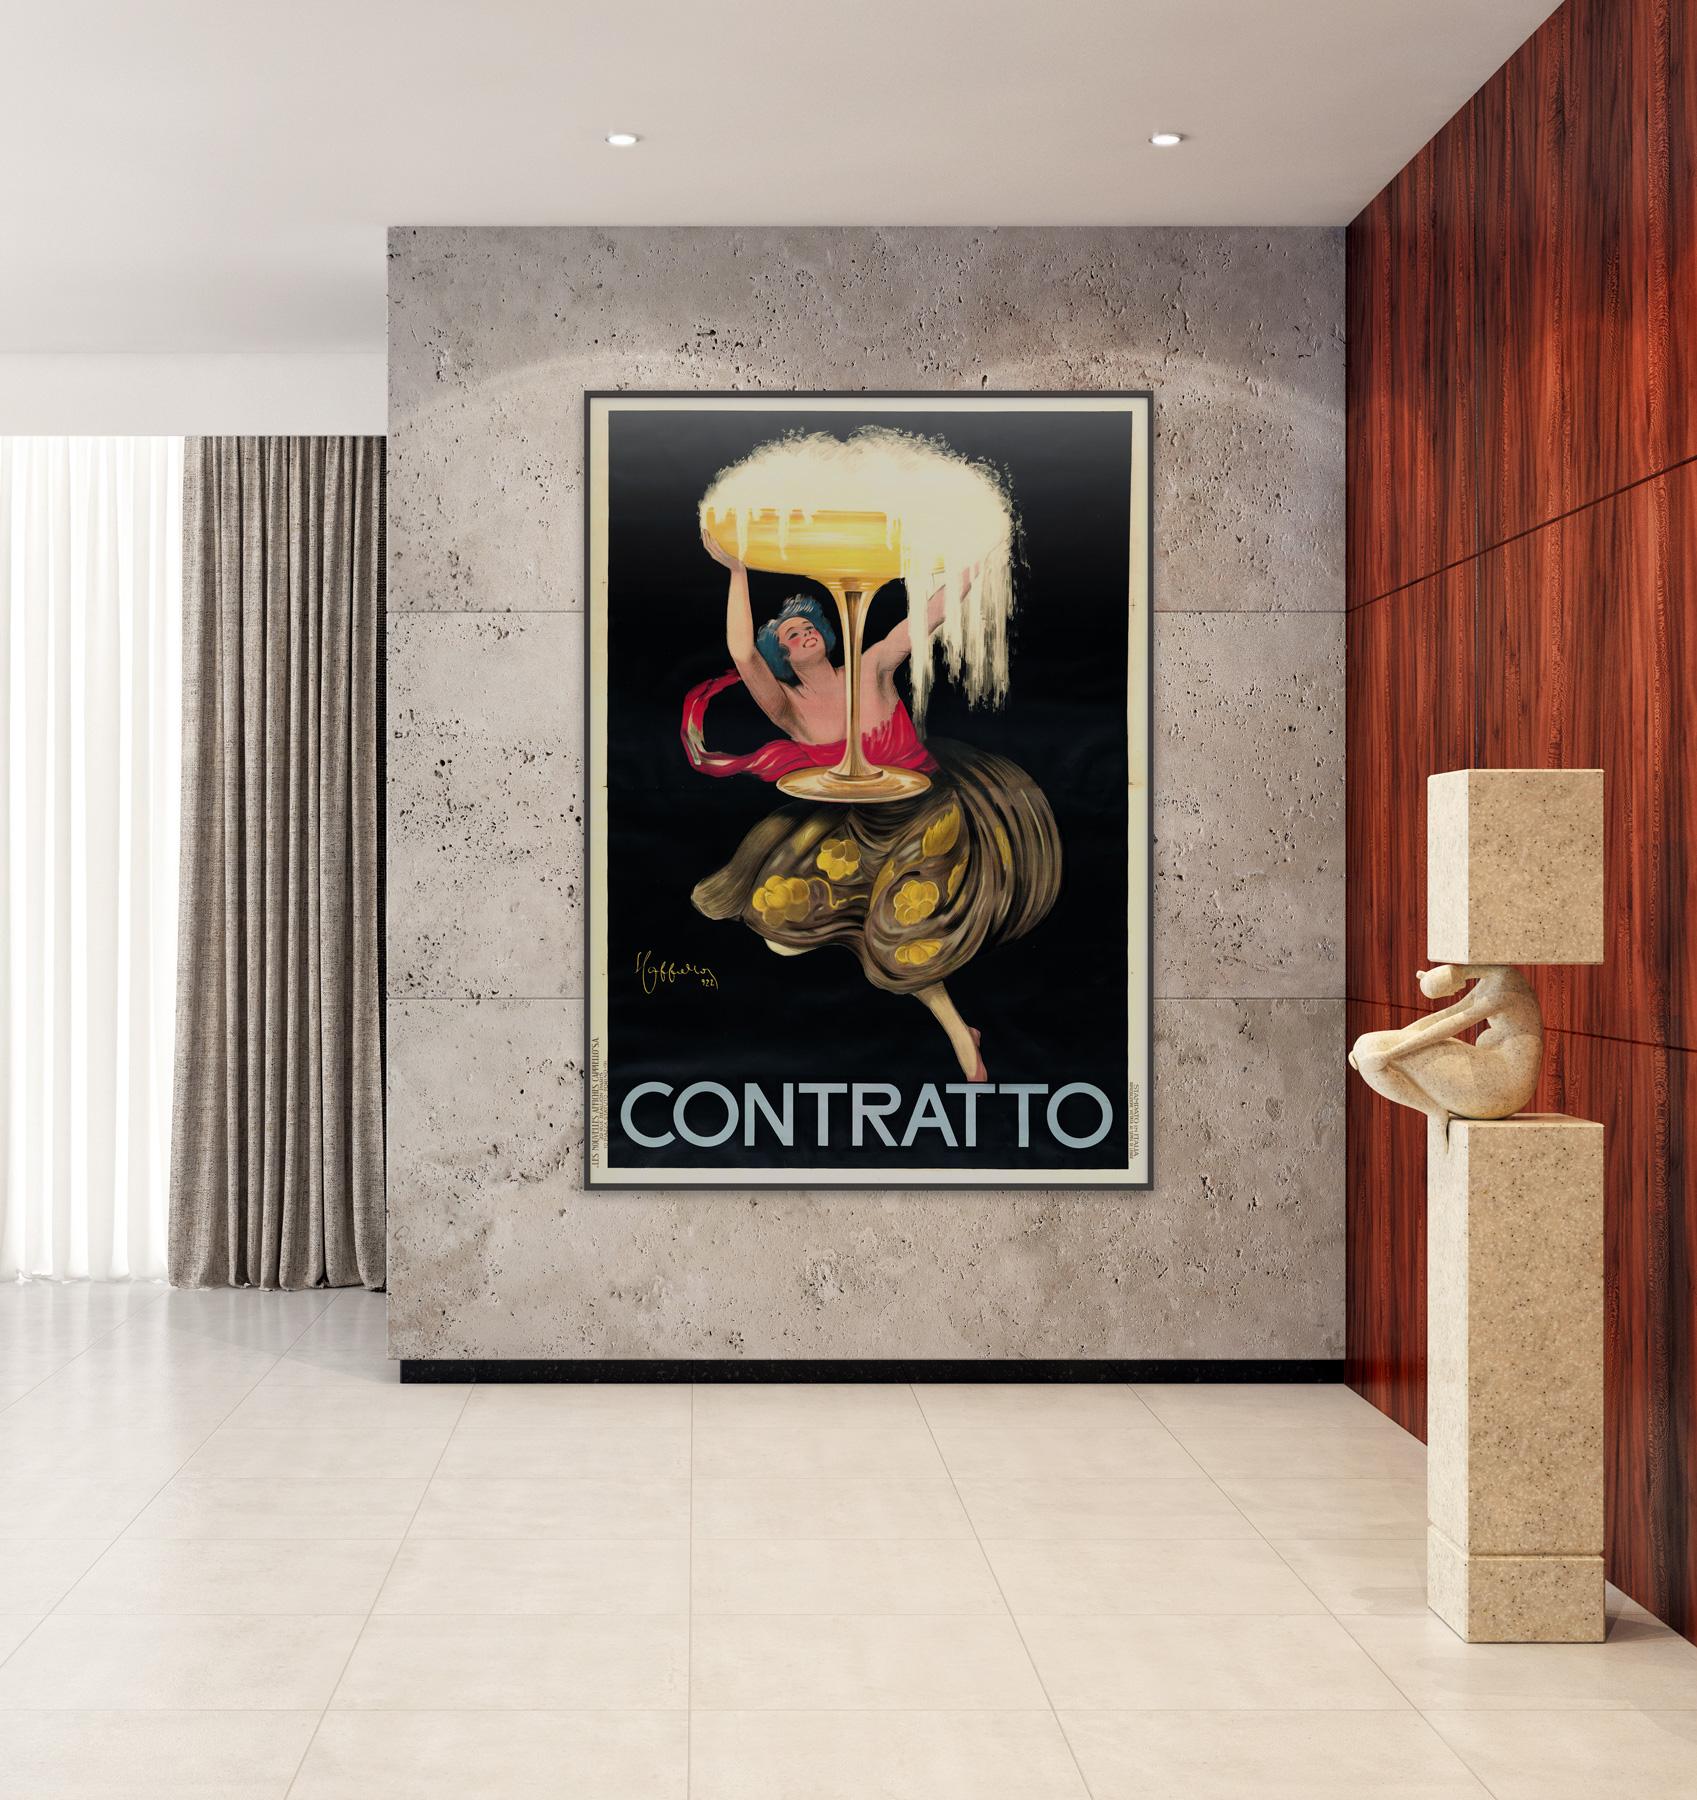 Original 1920s French vintage Contratto alcohol advertising poster featuring a wonderfully art deco design by poster artist Leonetto Cappiello. Another famous image by Cappiello - often called 'the father of modern advertising' because of his